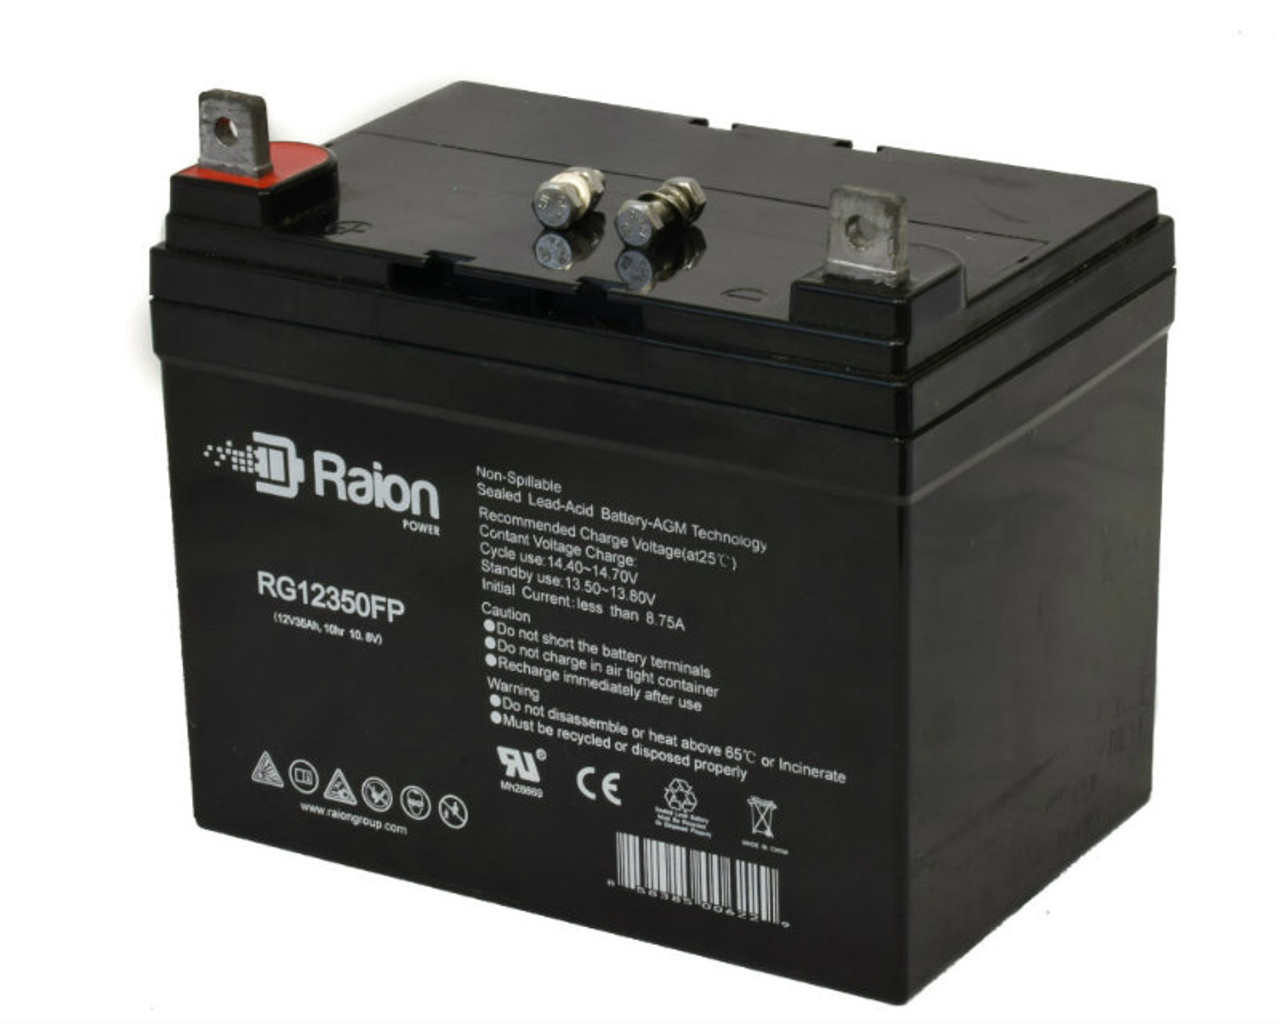 Raion Power Replacement 12V 35Ah Battery for Agco Allis 1615G - 1 Pack